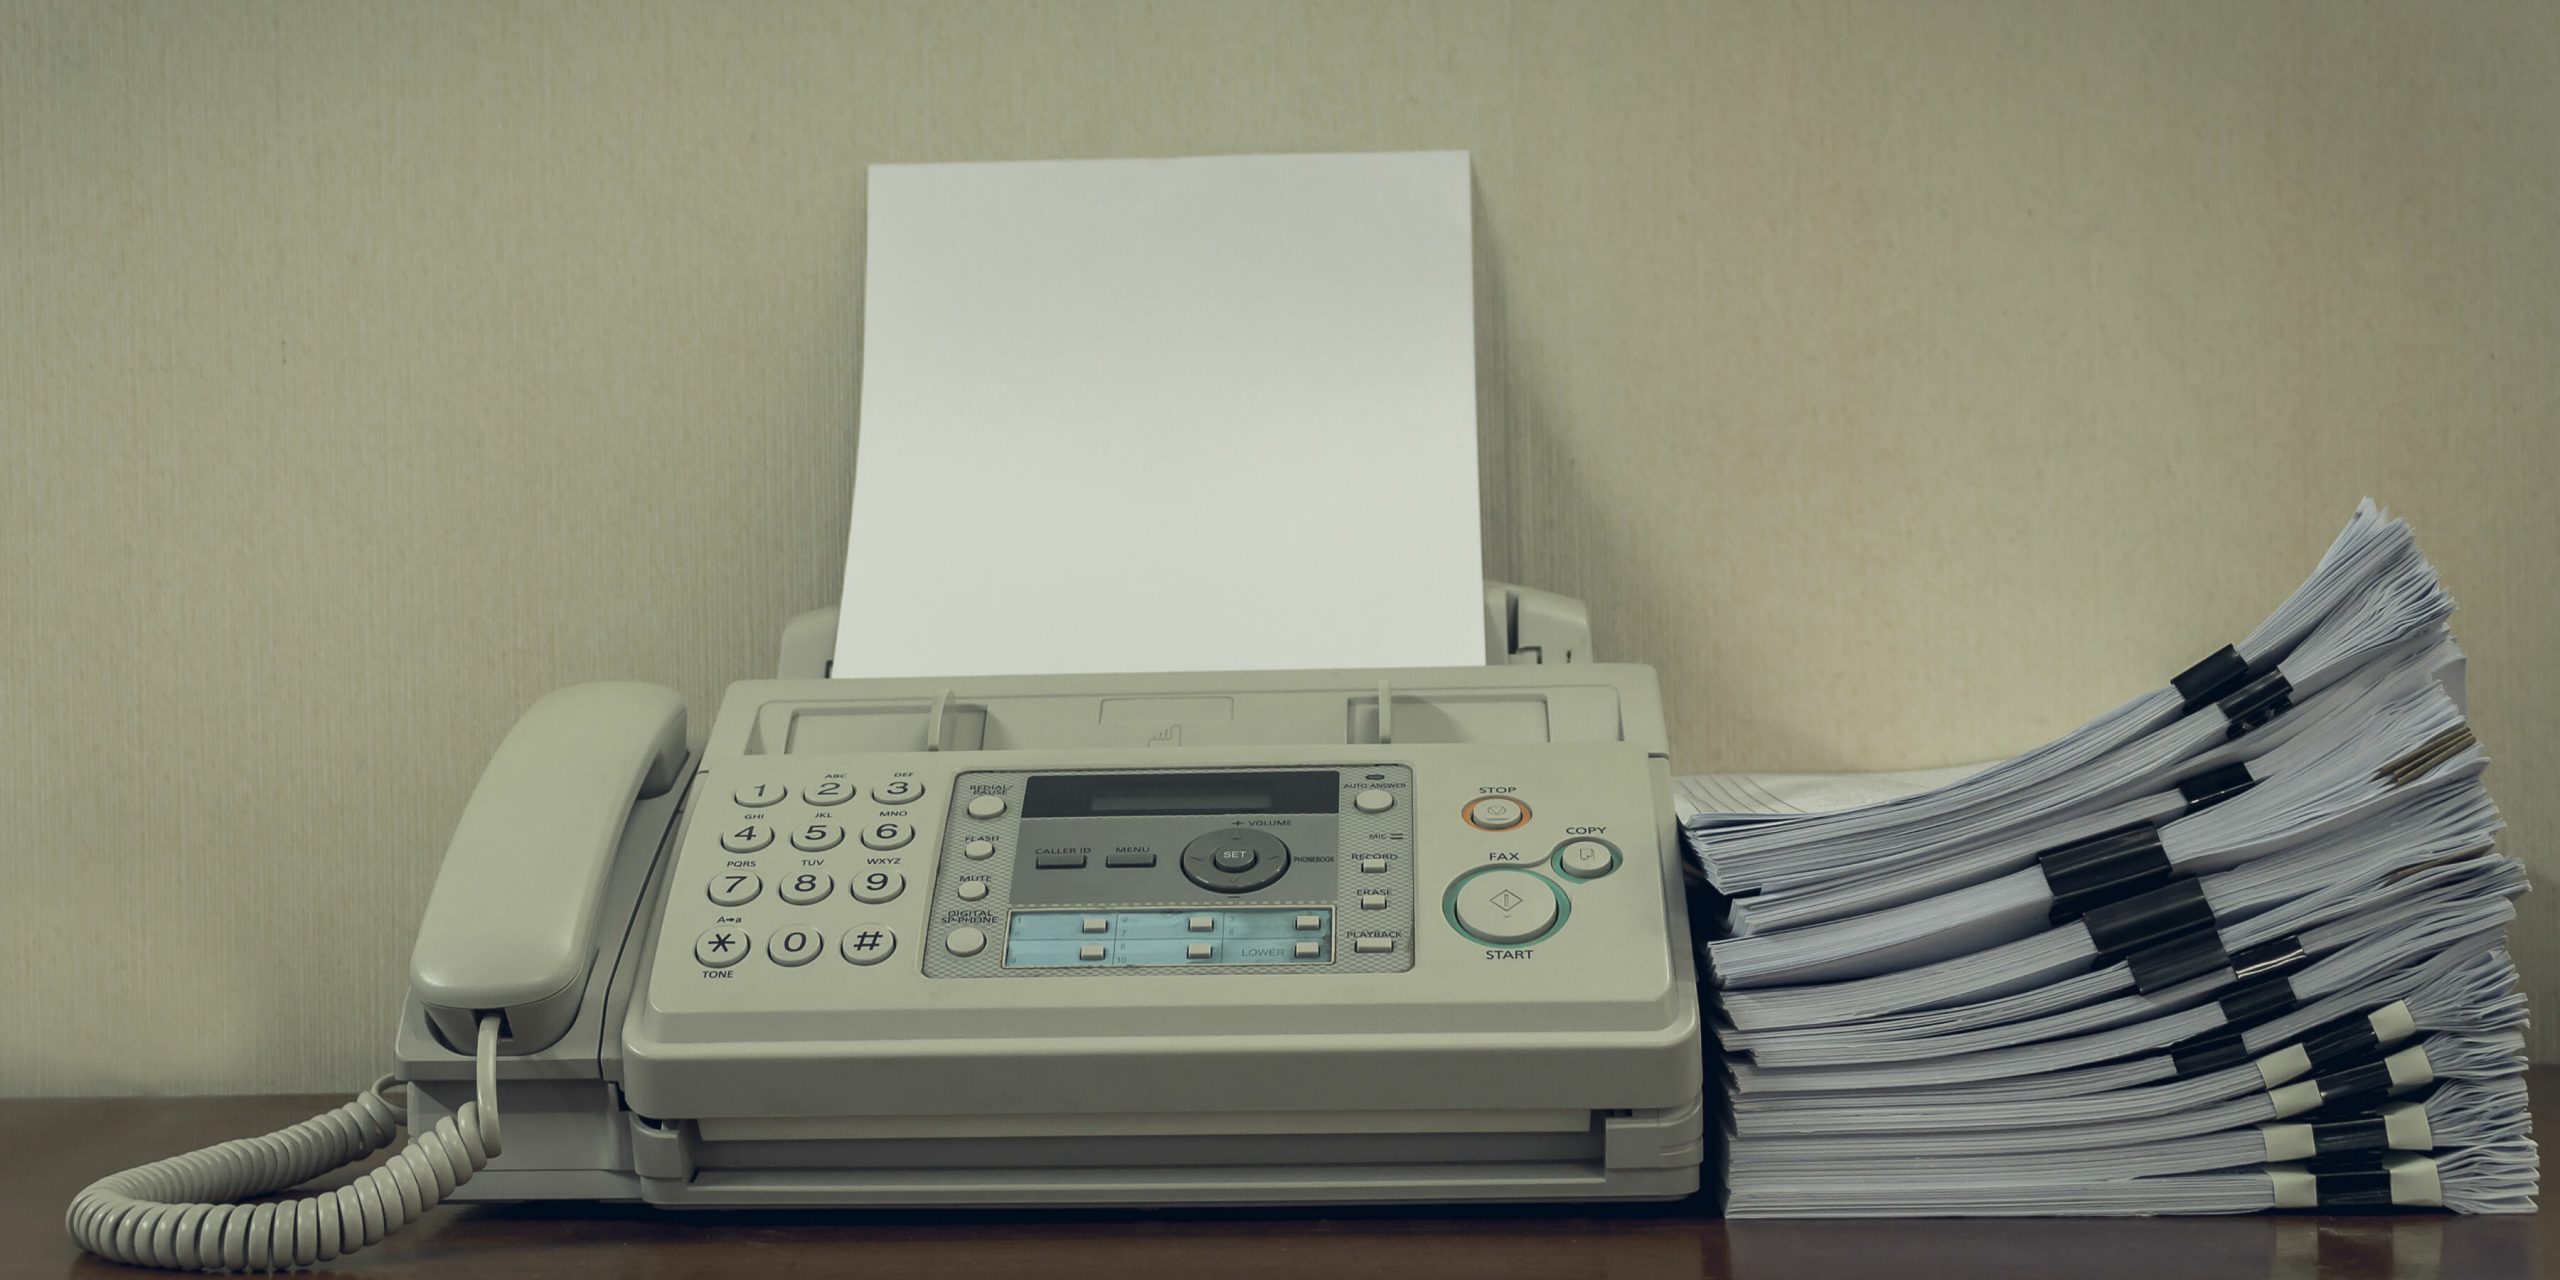 13 BEST FAX SERVICES NEAR ME TO FAX FOR LESS